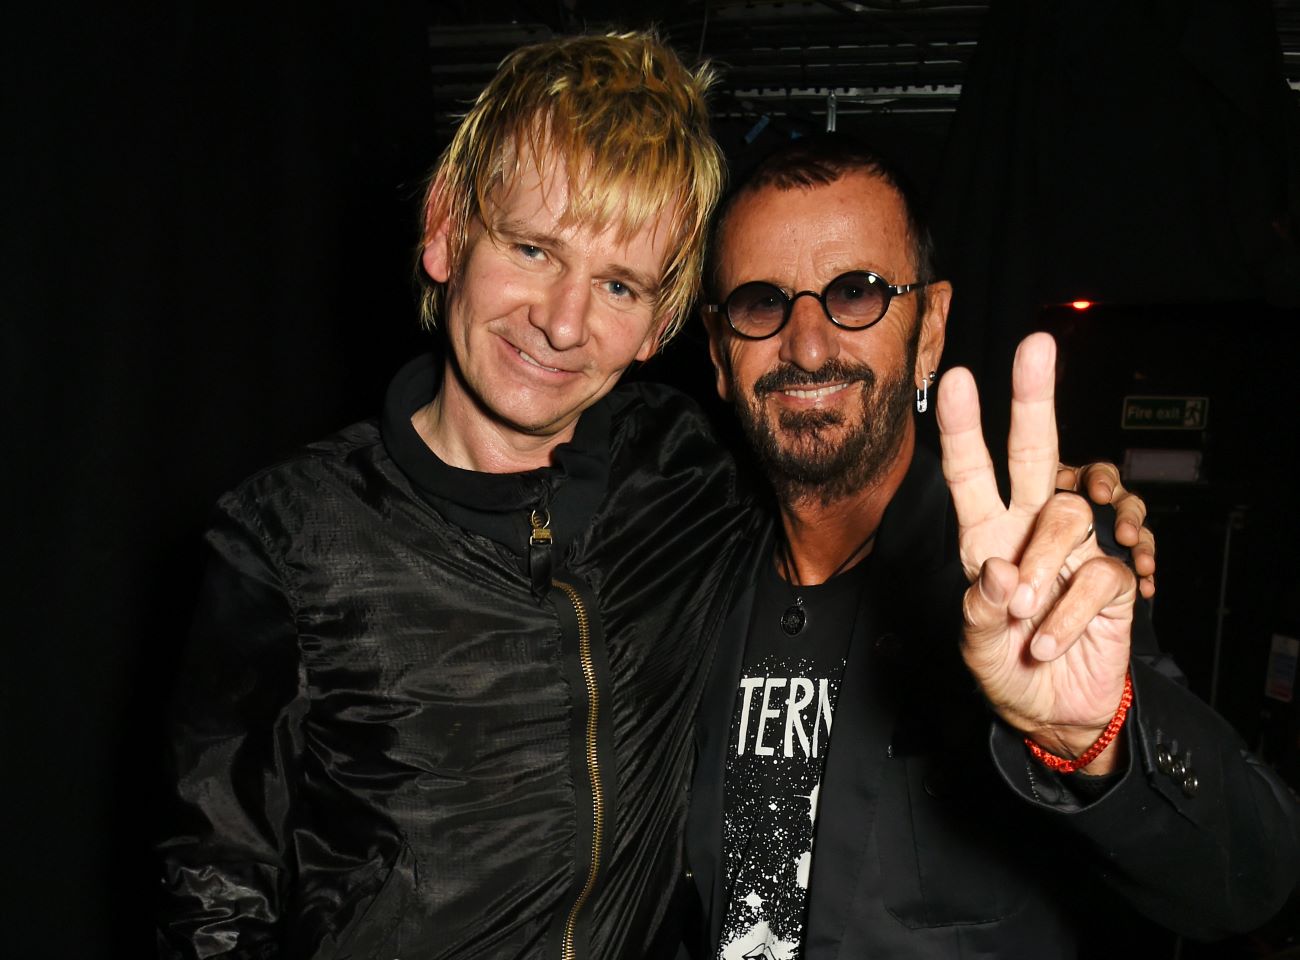 Zak Starkey stands with his arm around Ringo Starr's shoulder. Ringo Starr holds up a peace sign.